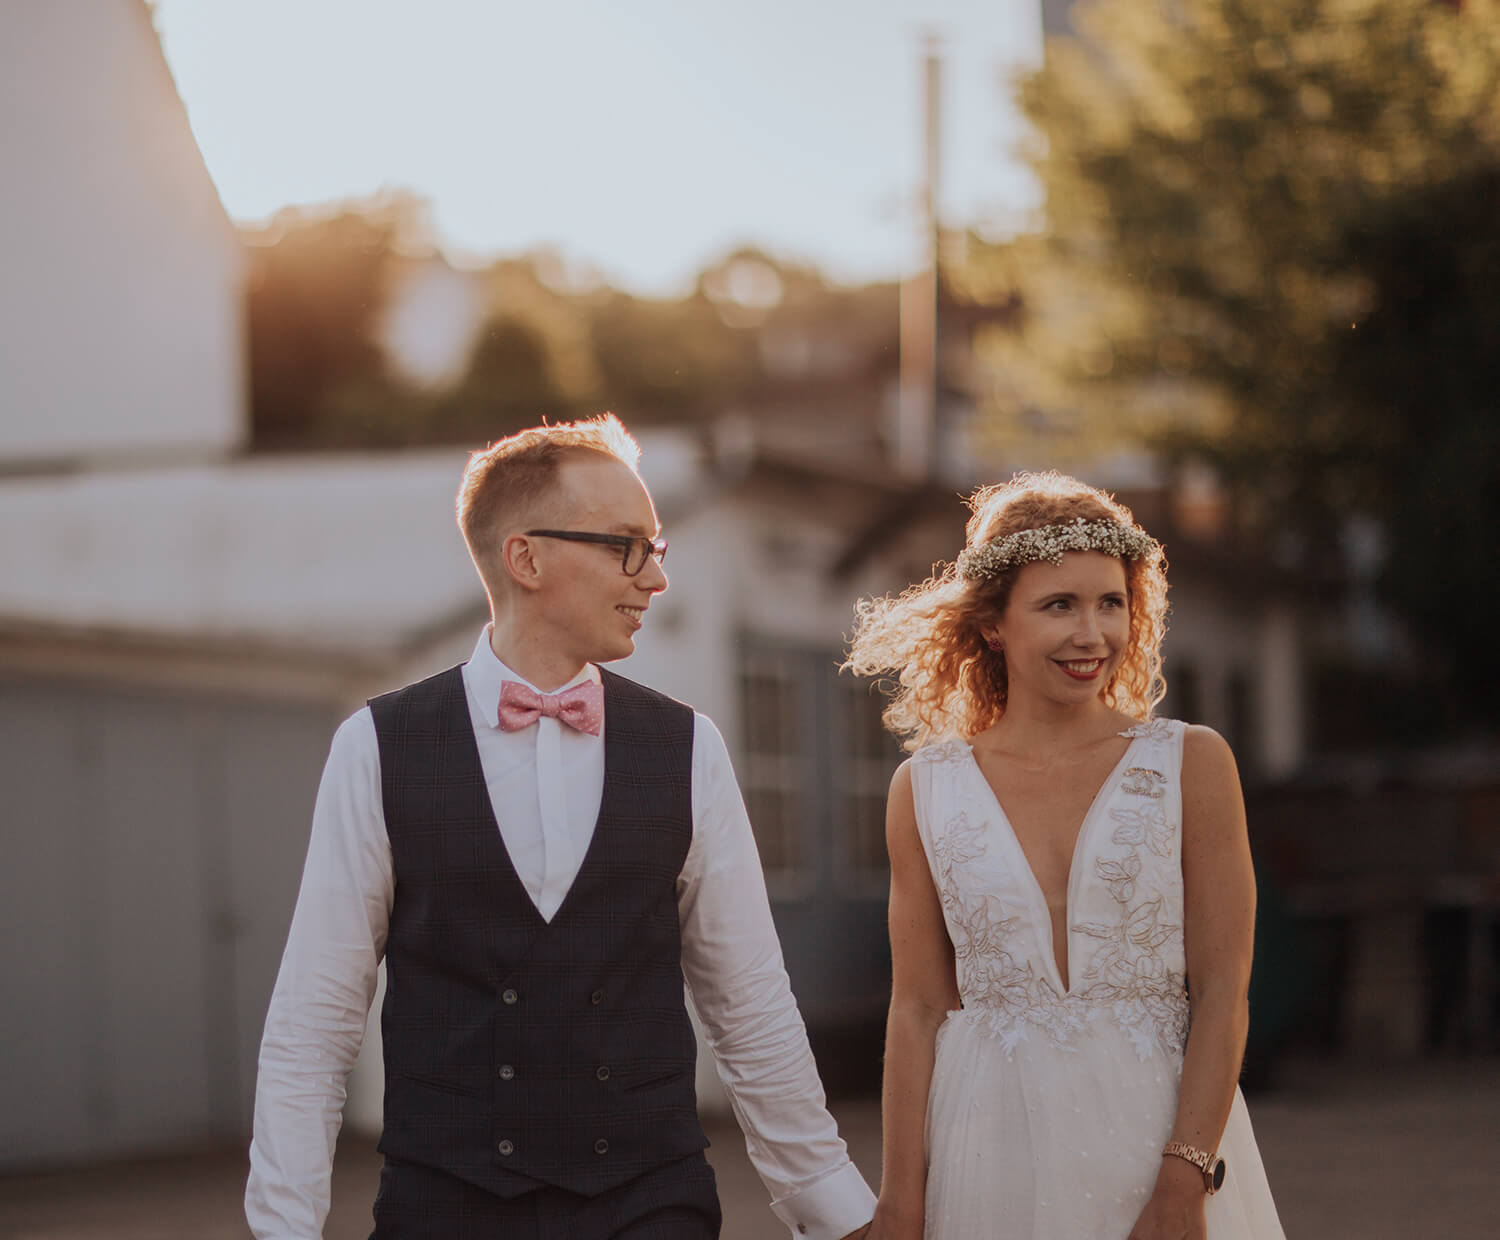 Wedding-Update-Couple-Shooting-during-our-Wedding-Party-Kationette-Lifestyleblogger-NRW-Brautpaarshooting